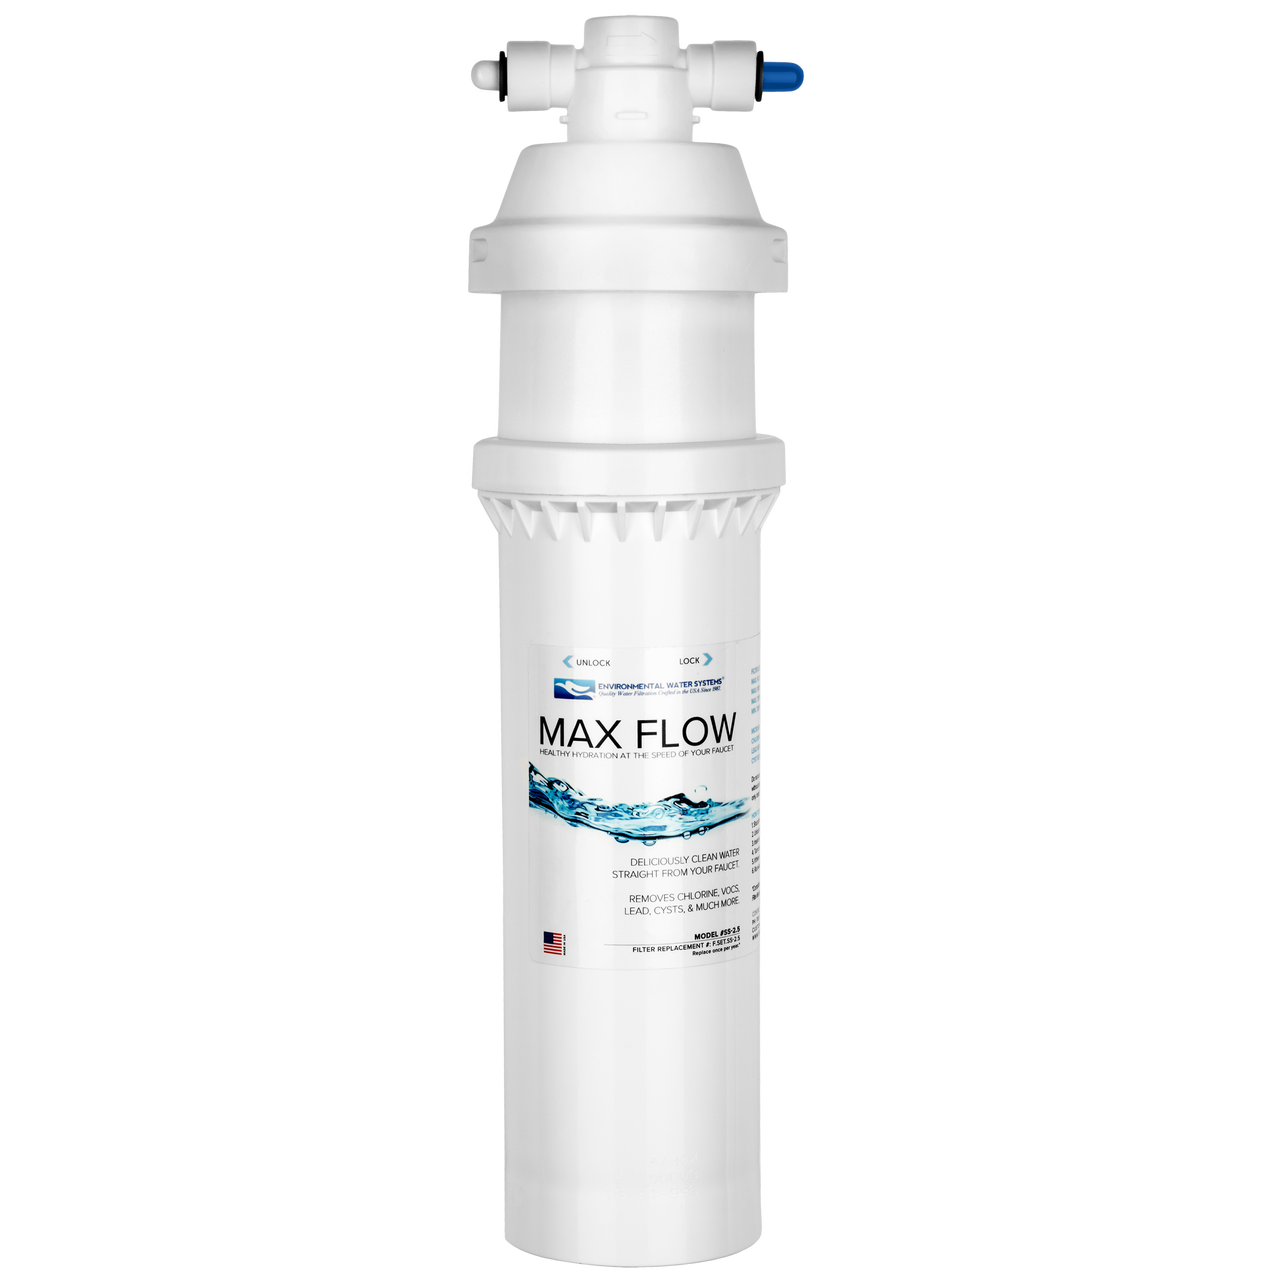 EWS Max Flow | No Drilling | 3-5 Minute Install | USA Made | Removes Chlorine, Chloramine, Lead, Cysts, Pesticides, & Much More